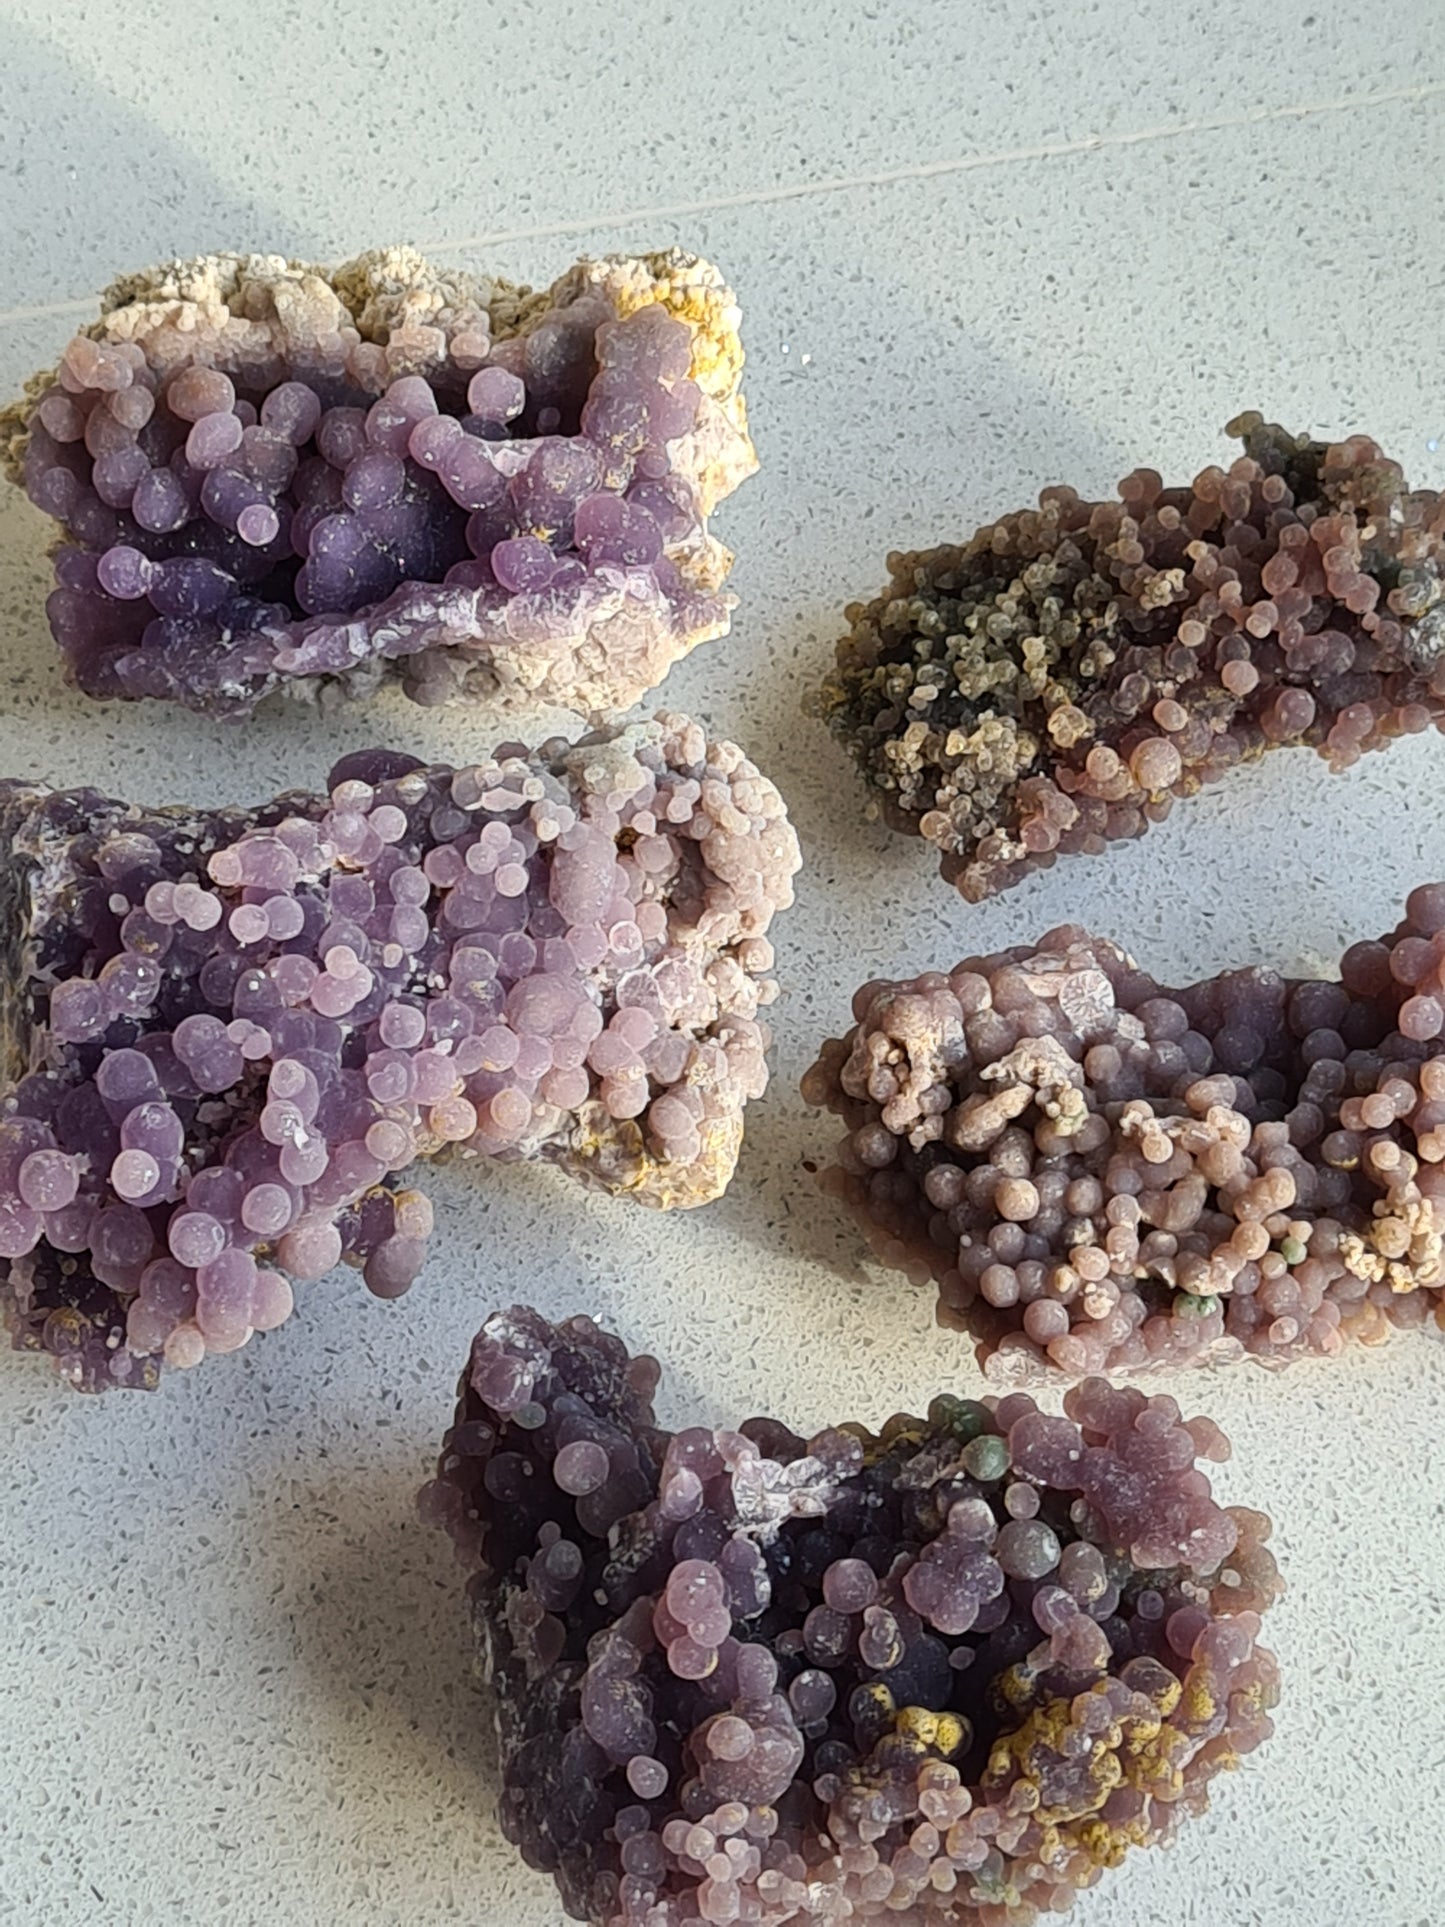 A collection of raw grape agate/chalcedony specimens. Bringing calming energy with clarity and guidance.